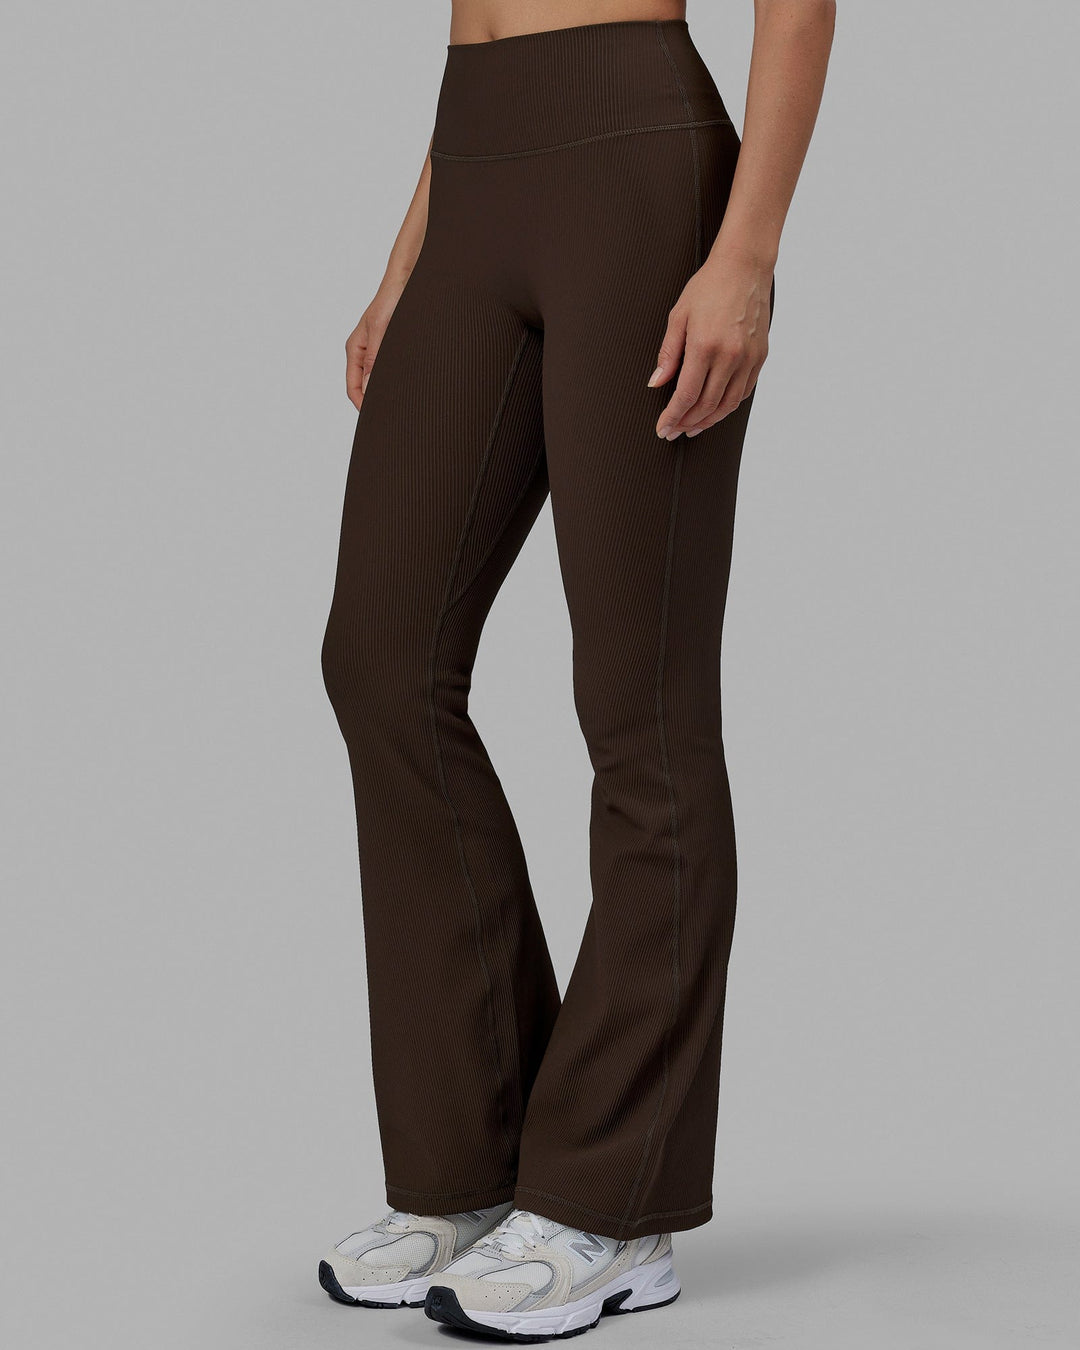 Woman wearing Everyday Ribbed Flare Tight - Dark Chocolate